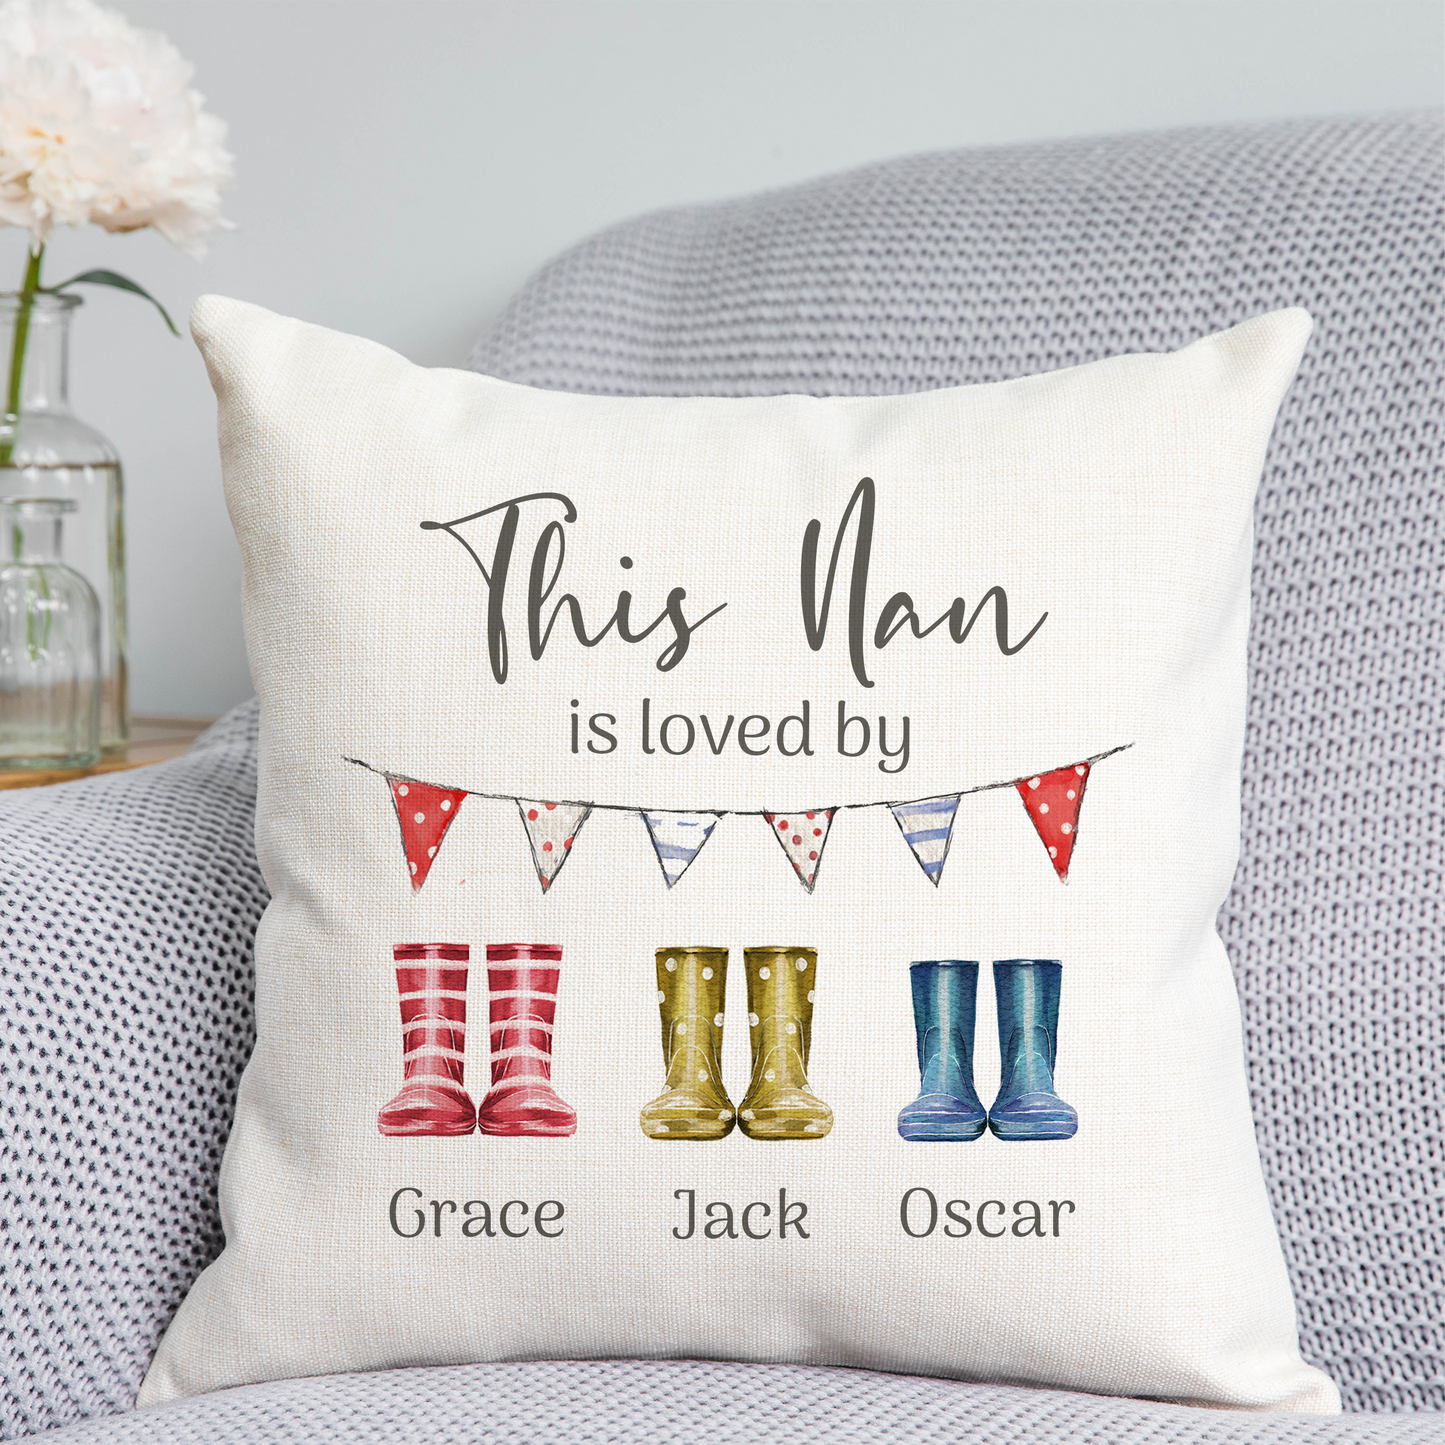 Wellington Boot 'Nanny is loved by' Cushion